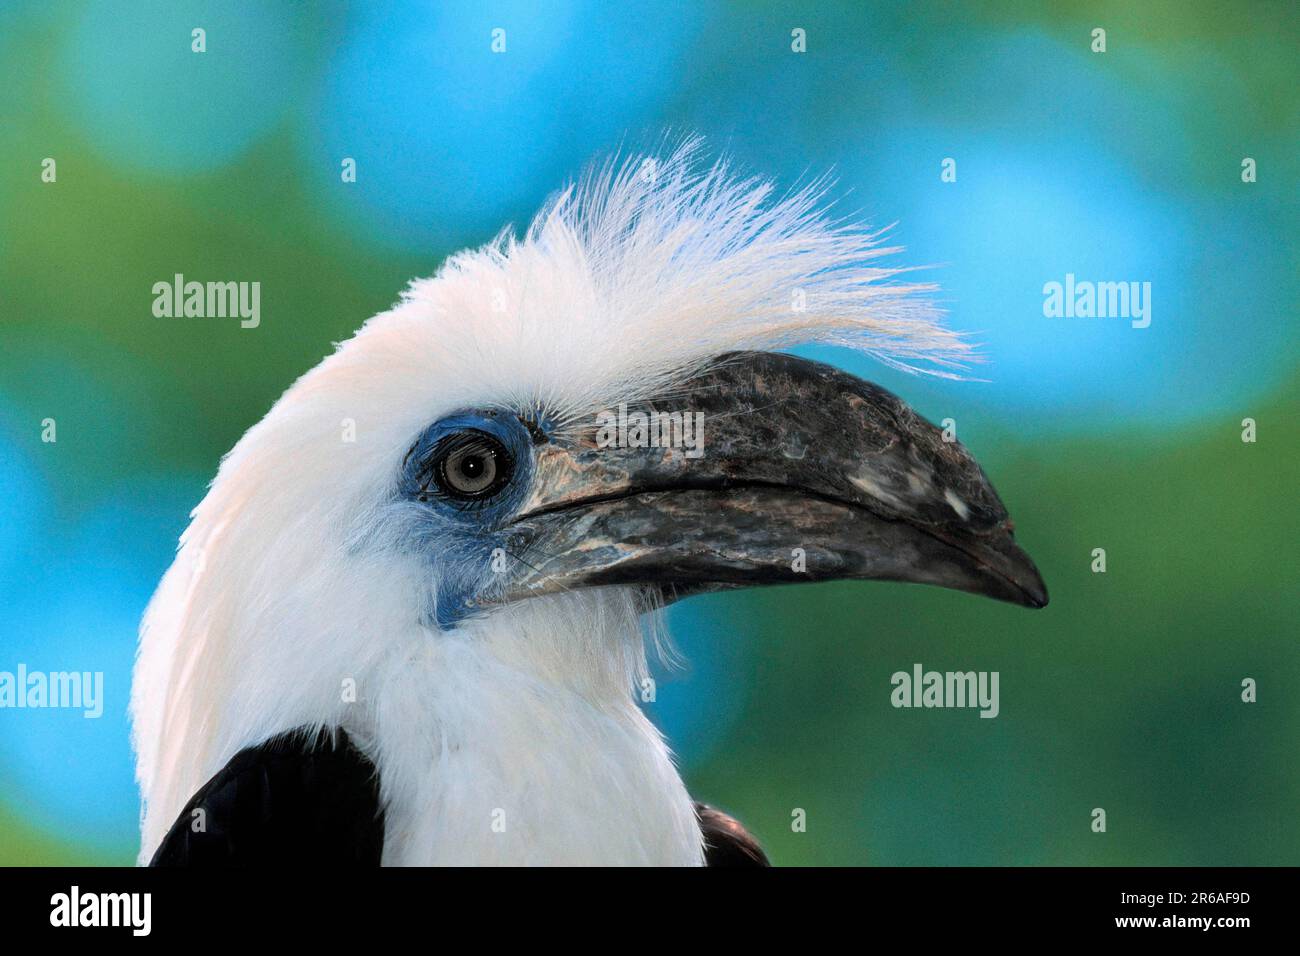 White-crested Hornbill (Aceros comatus), lateral view Stock Photo